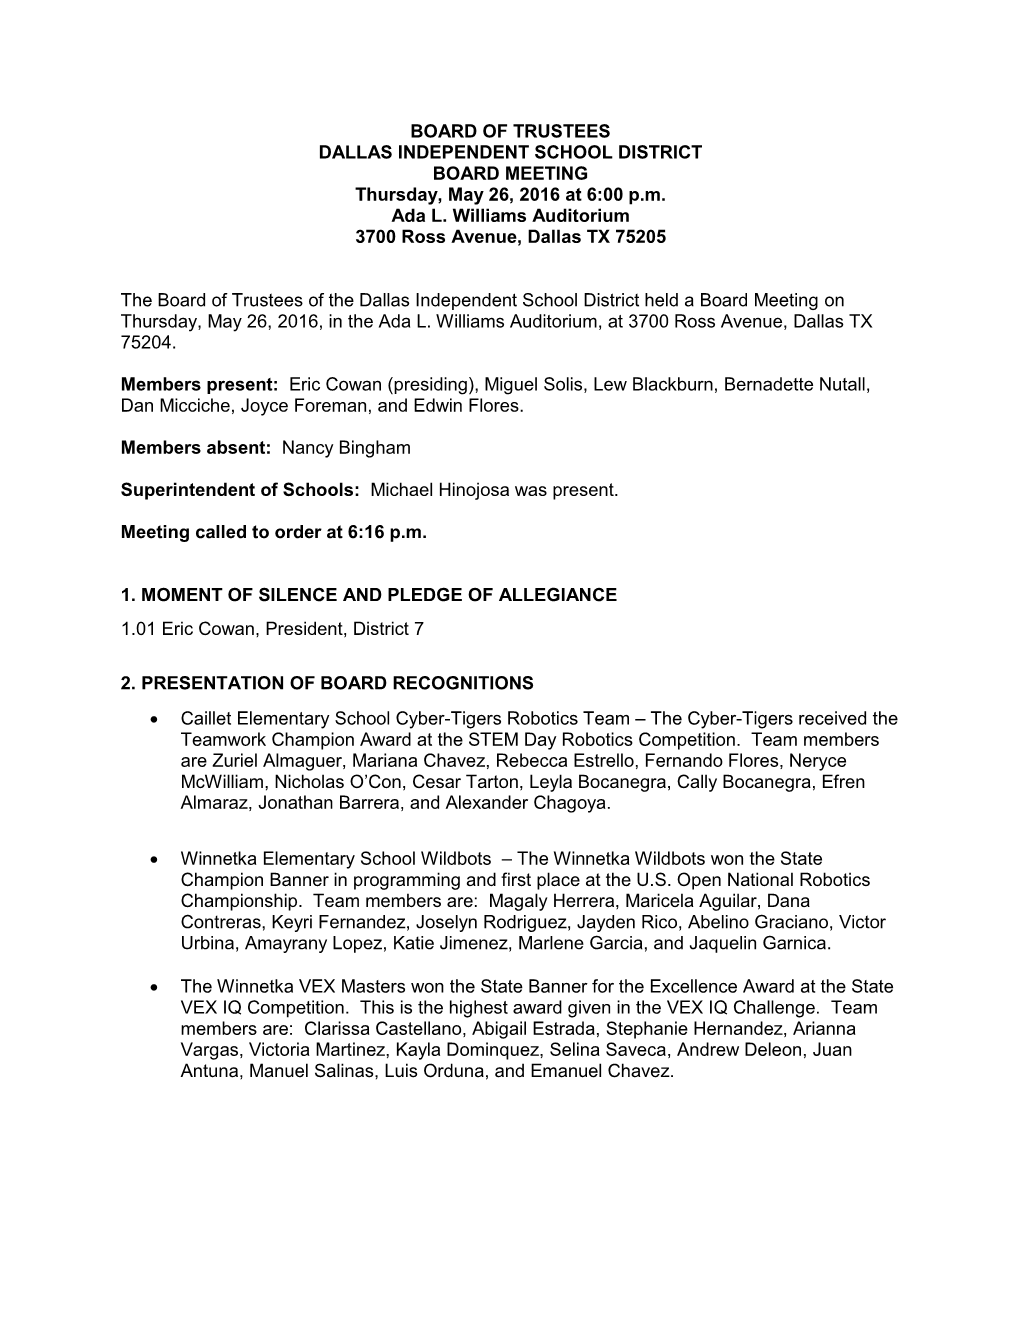 BOARD of TRUSTEES DALLAS INDEPENDENT SCHOOL DISTRICT BOARD MEETING Thursday, May 26, 2016 at 6:00 P.M